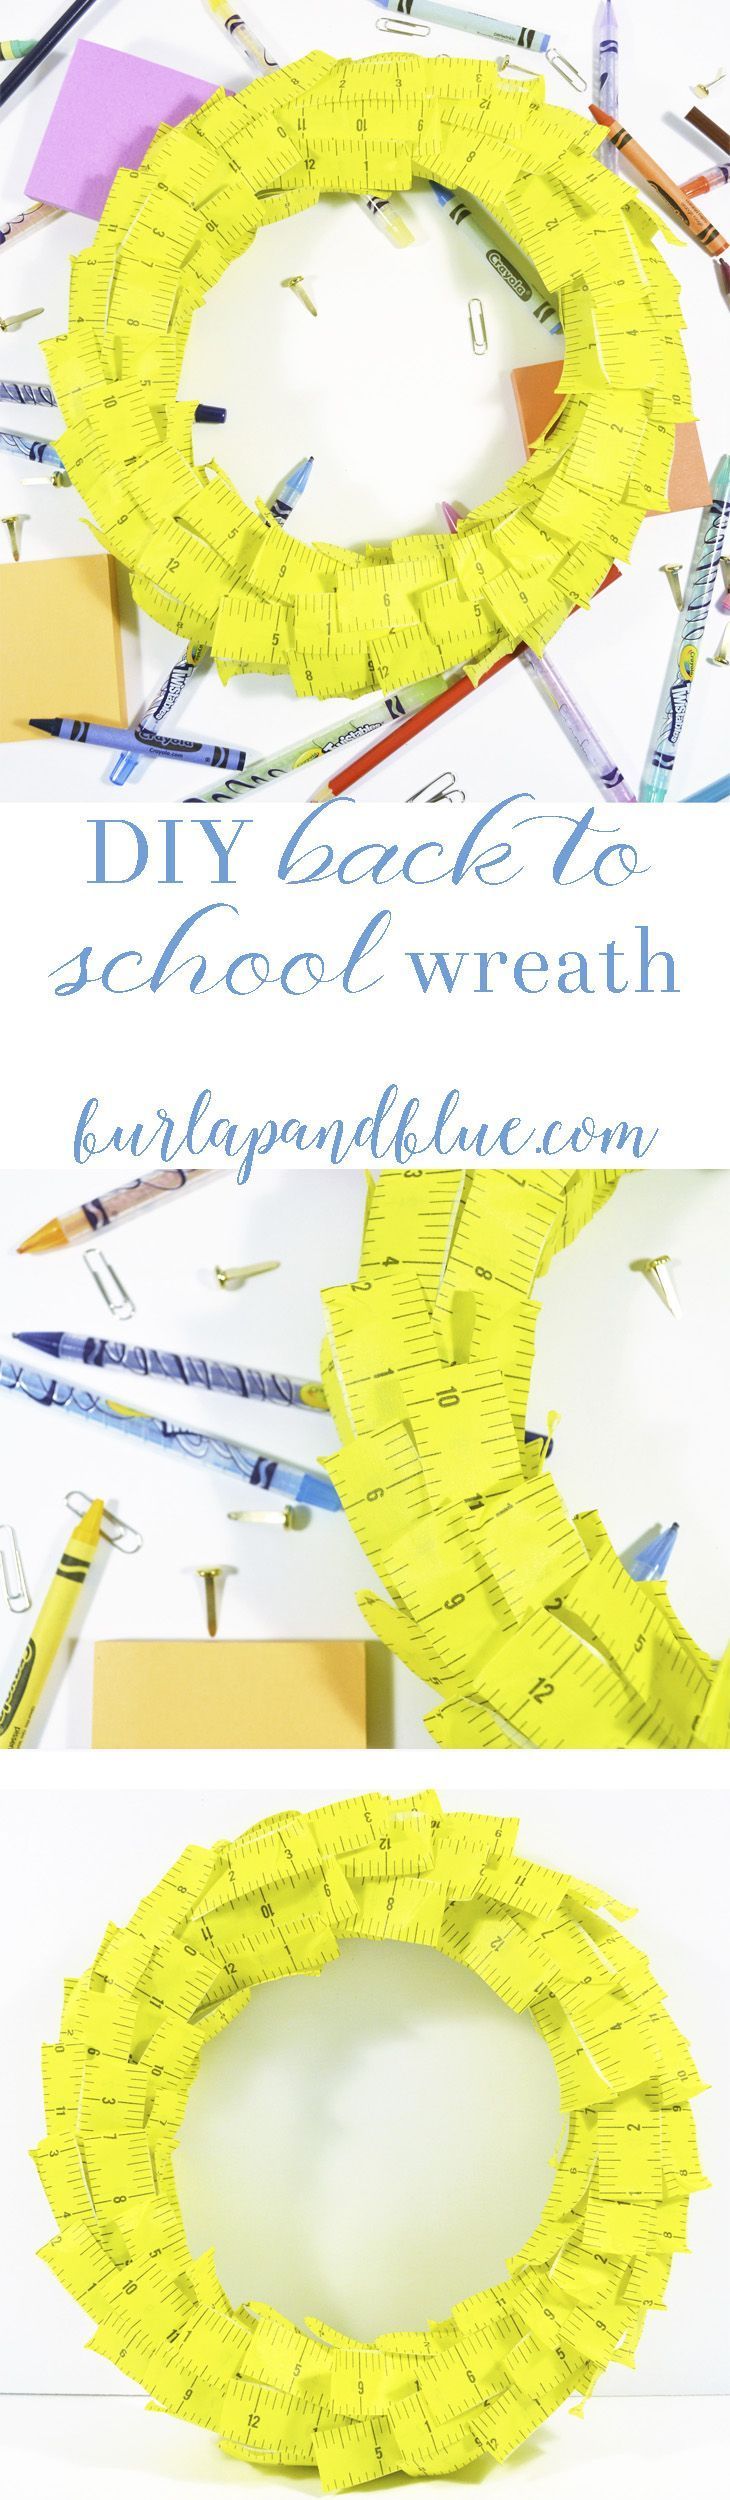 make this easy back to school wreath using washi or duct tape and a wreath form!...